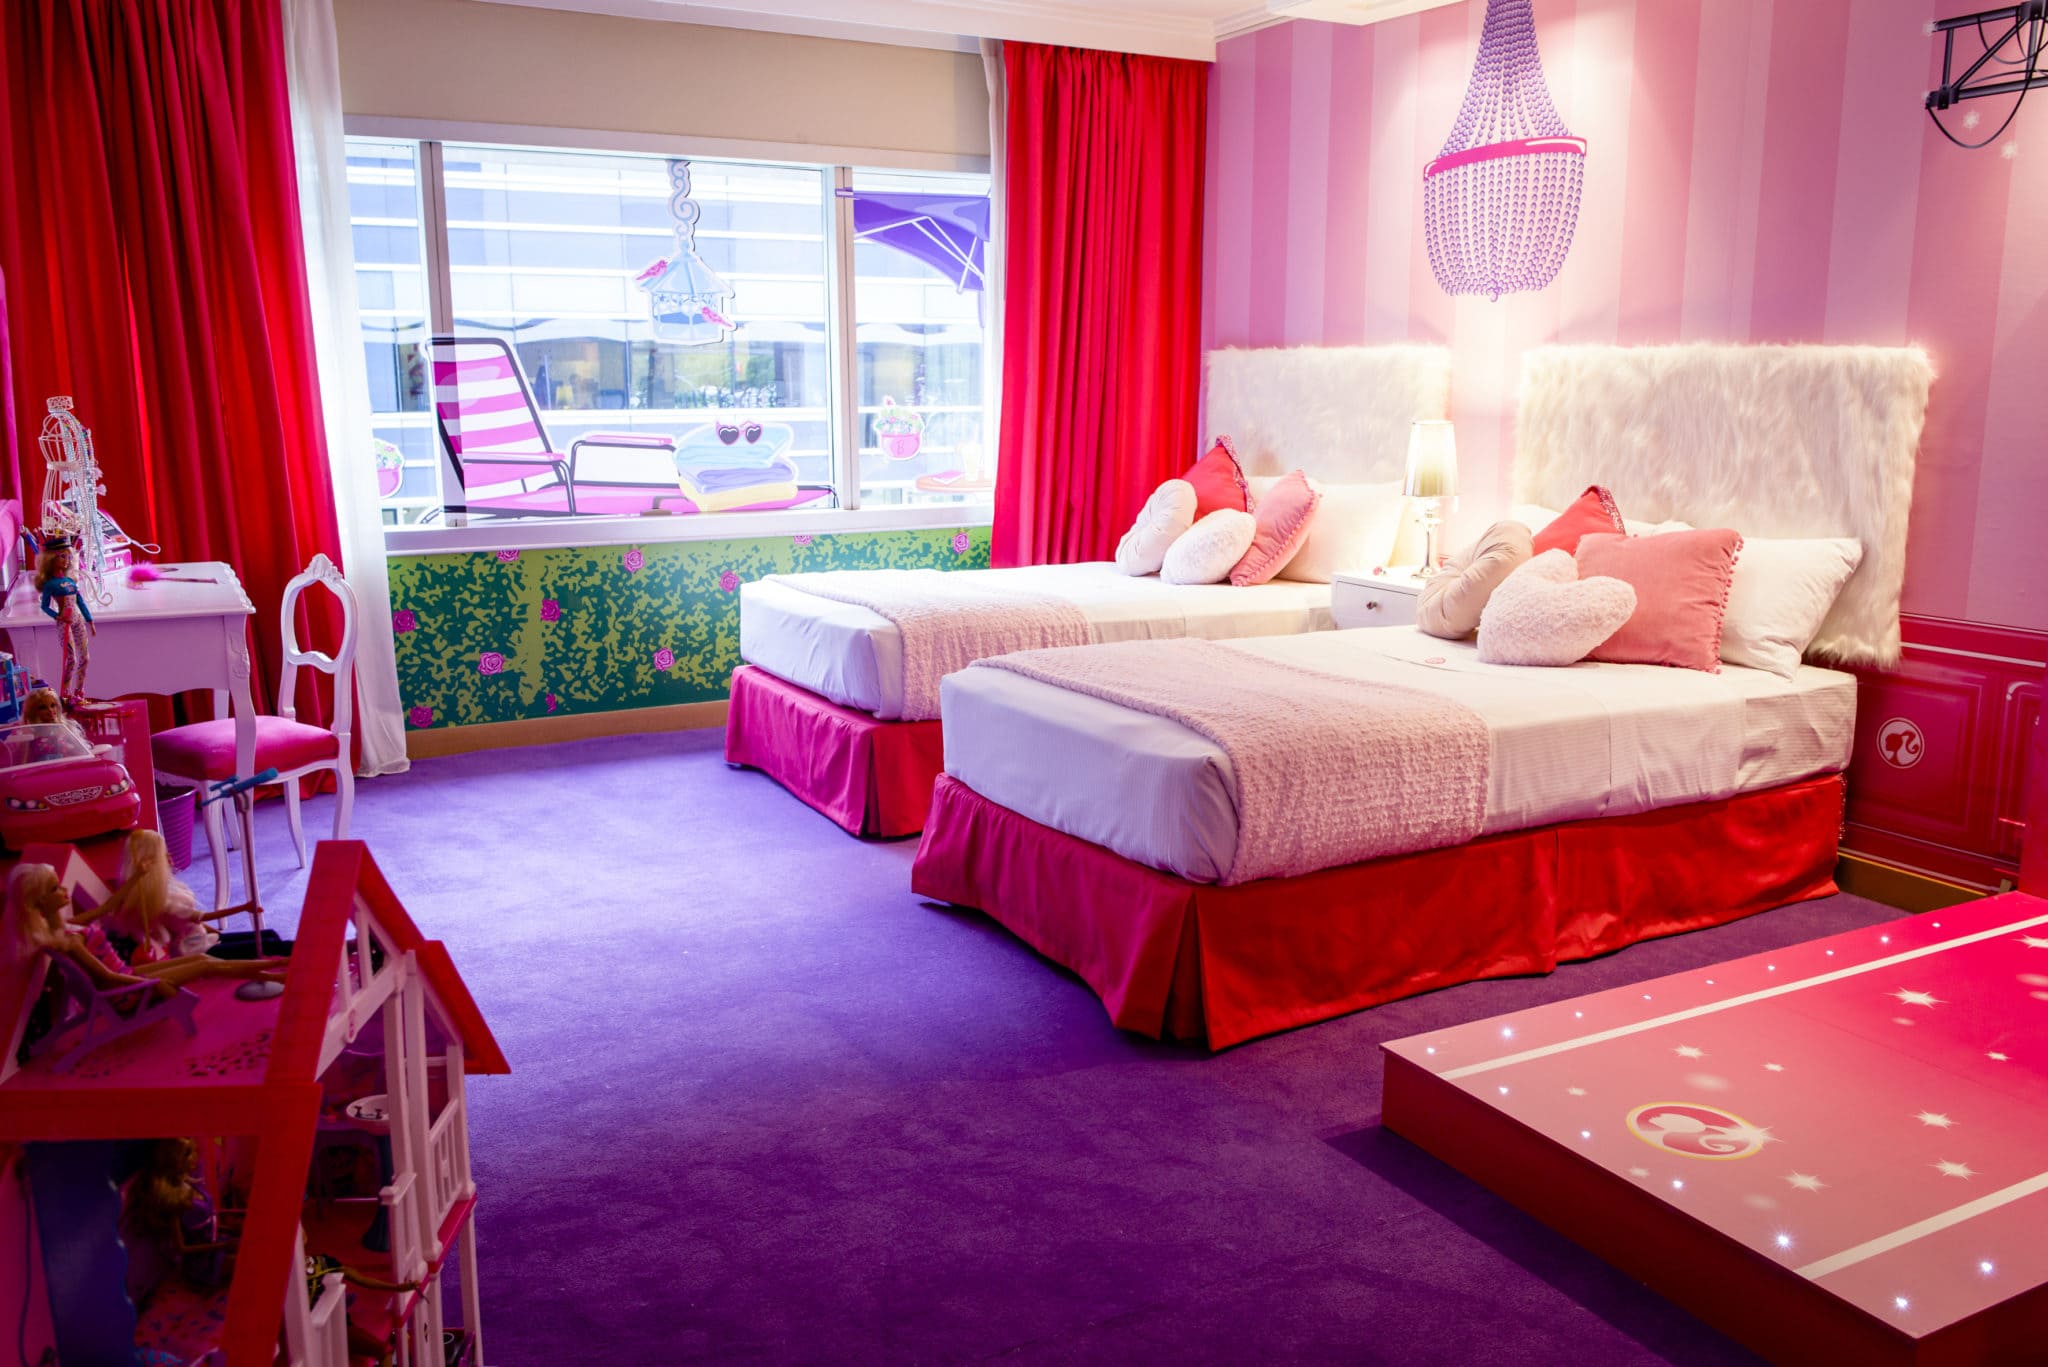 Barbie Room Returns To Hilton Buenos Aires Offering A Once In A Lifetime Experience With All